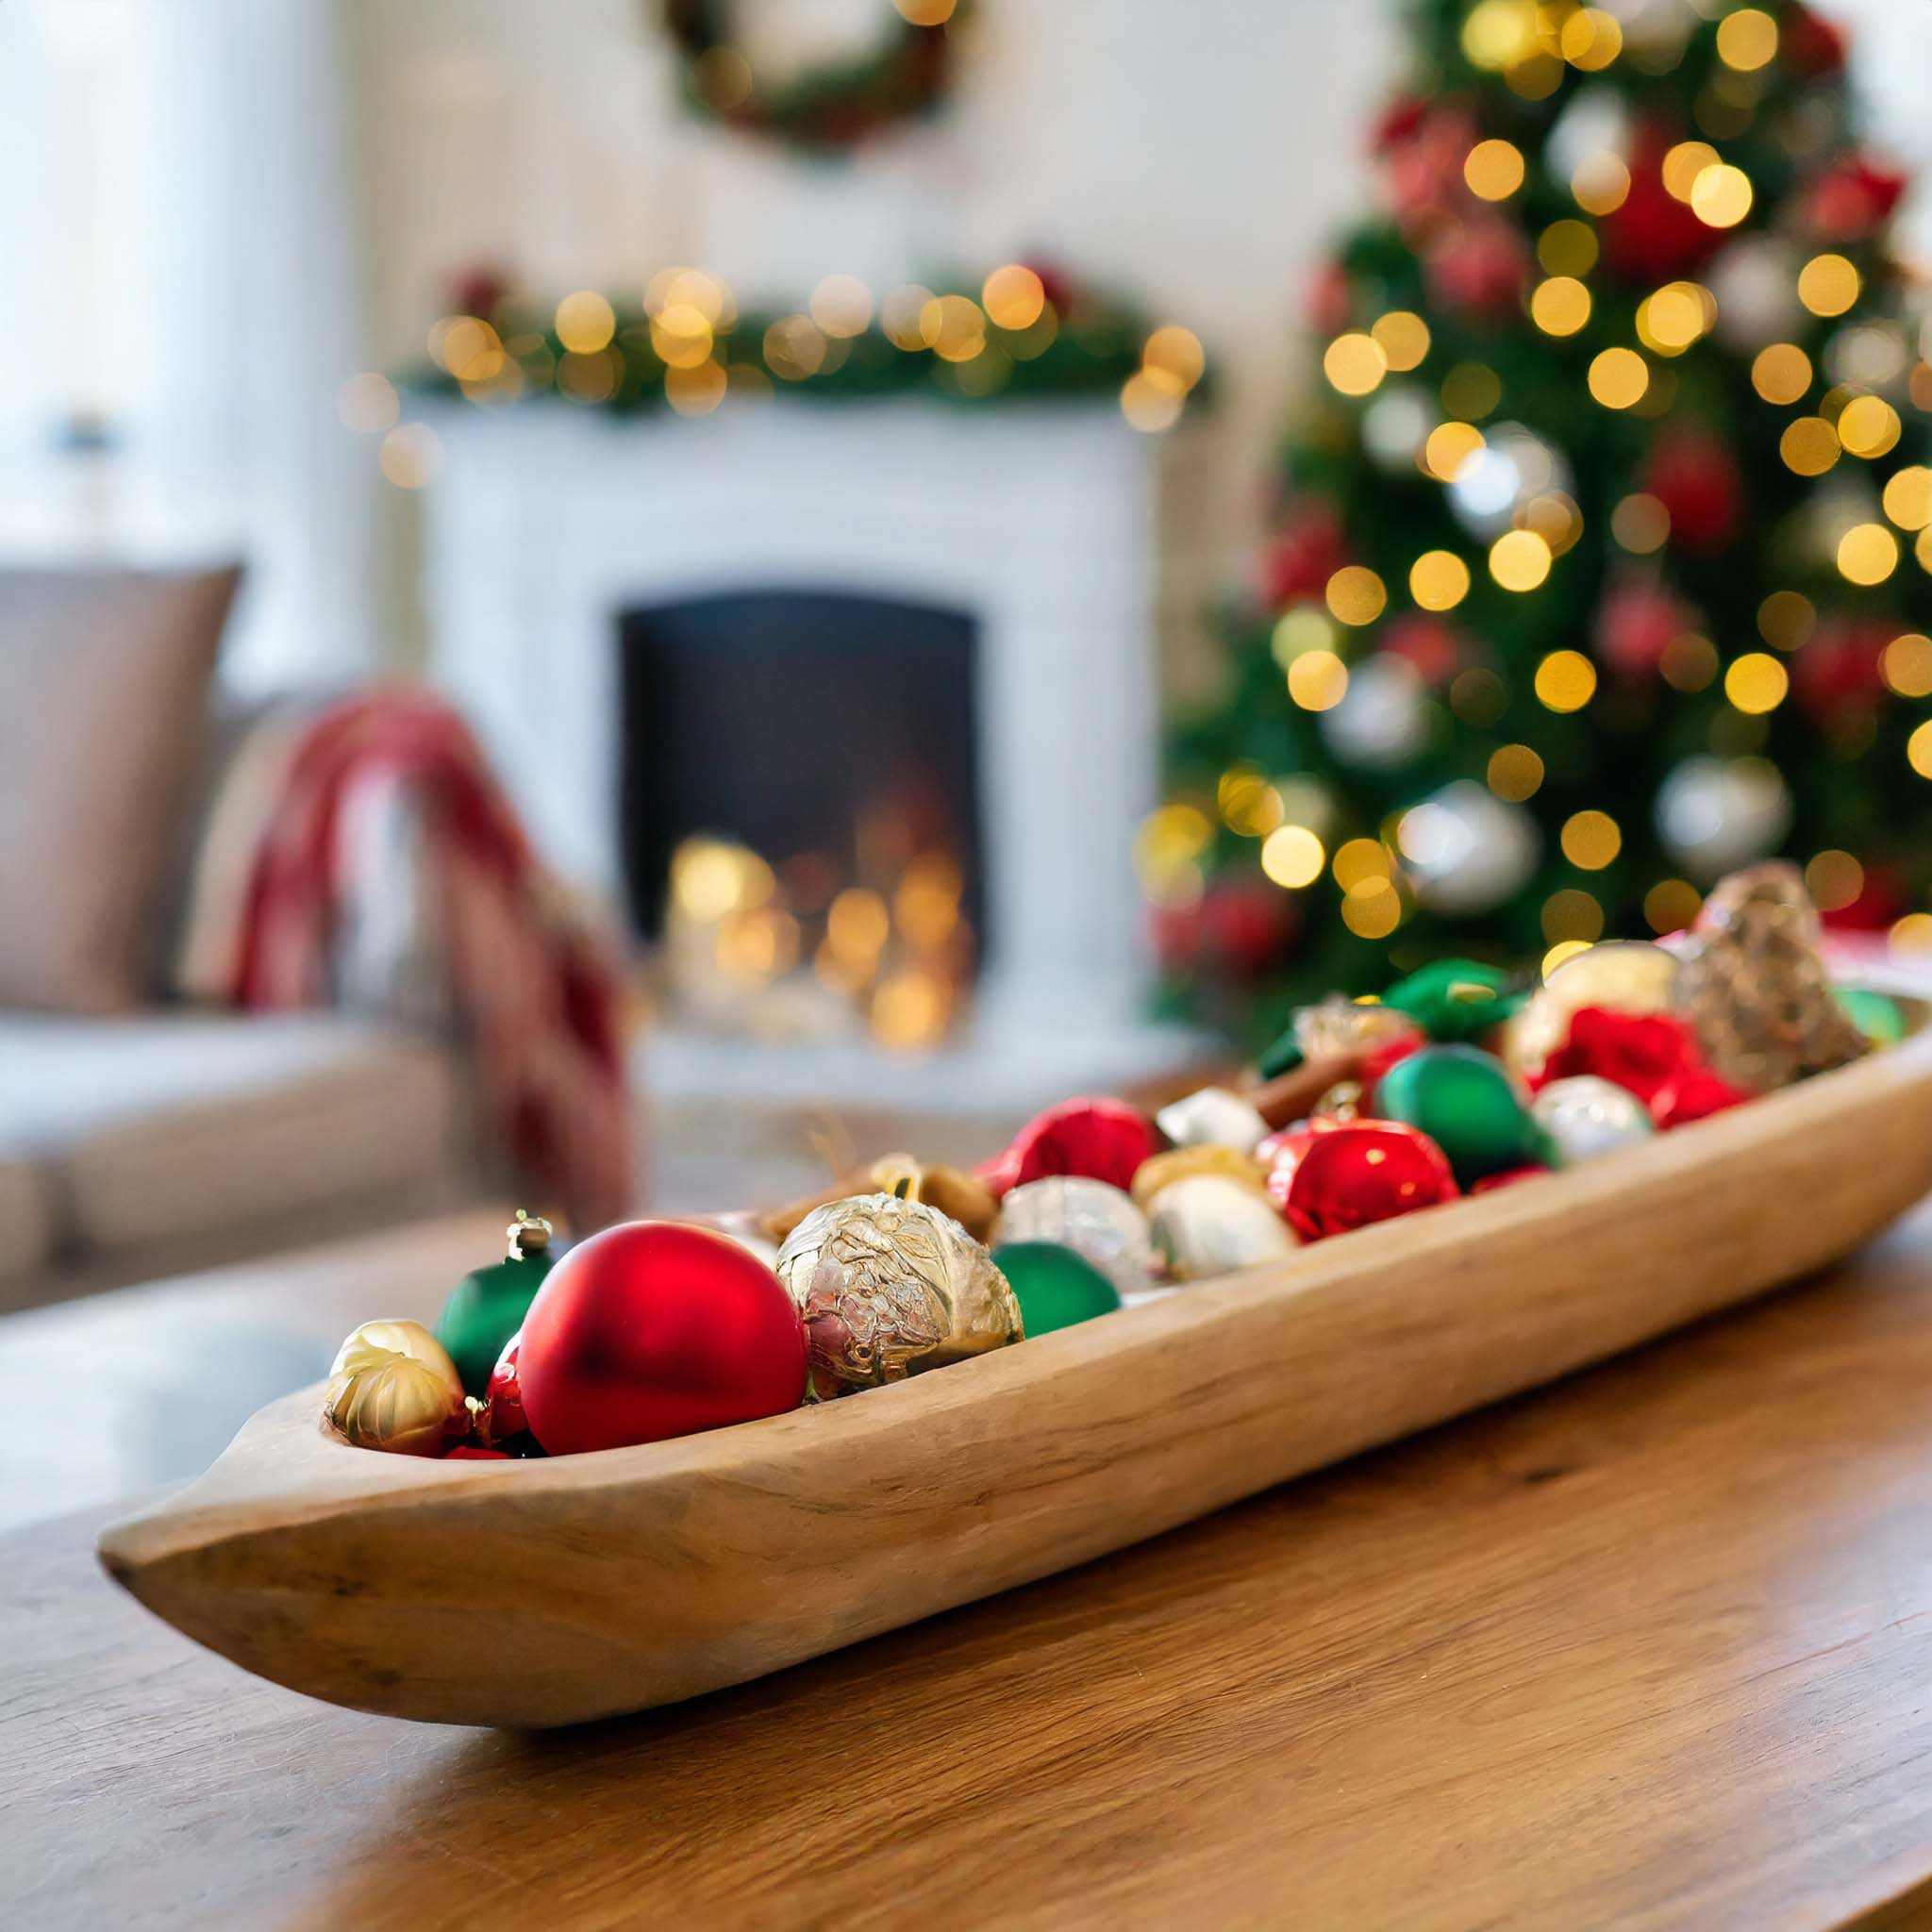 Long wooden dough bowl filled with bright colored Christmas ornaments with Christmas tree and fireplace in the background.